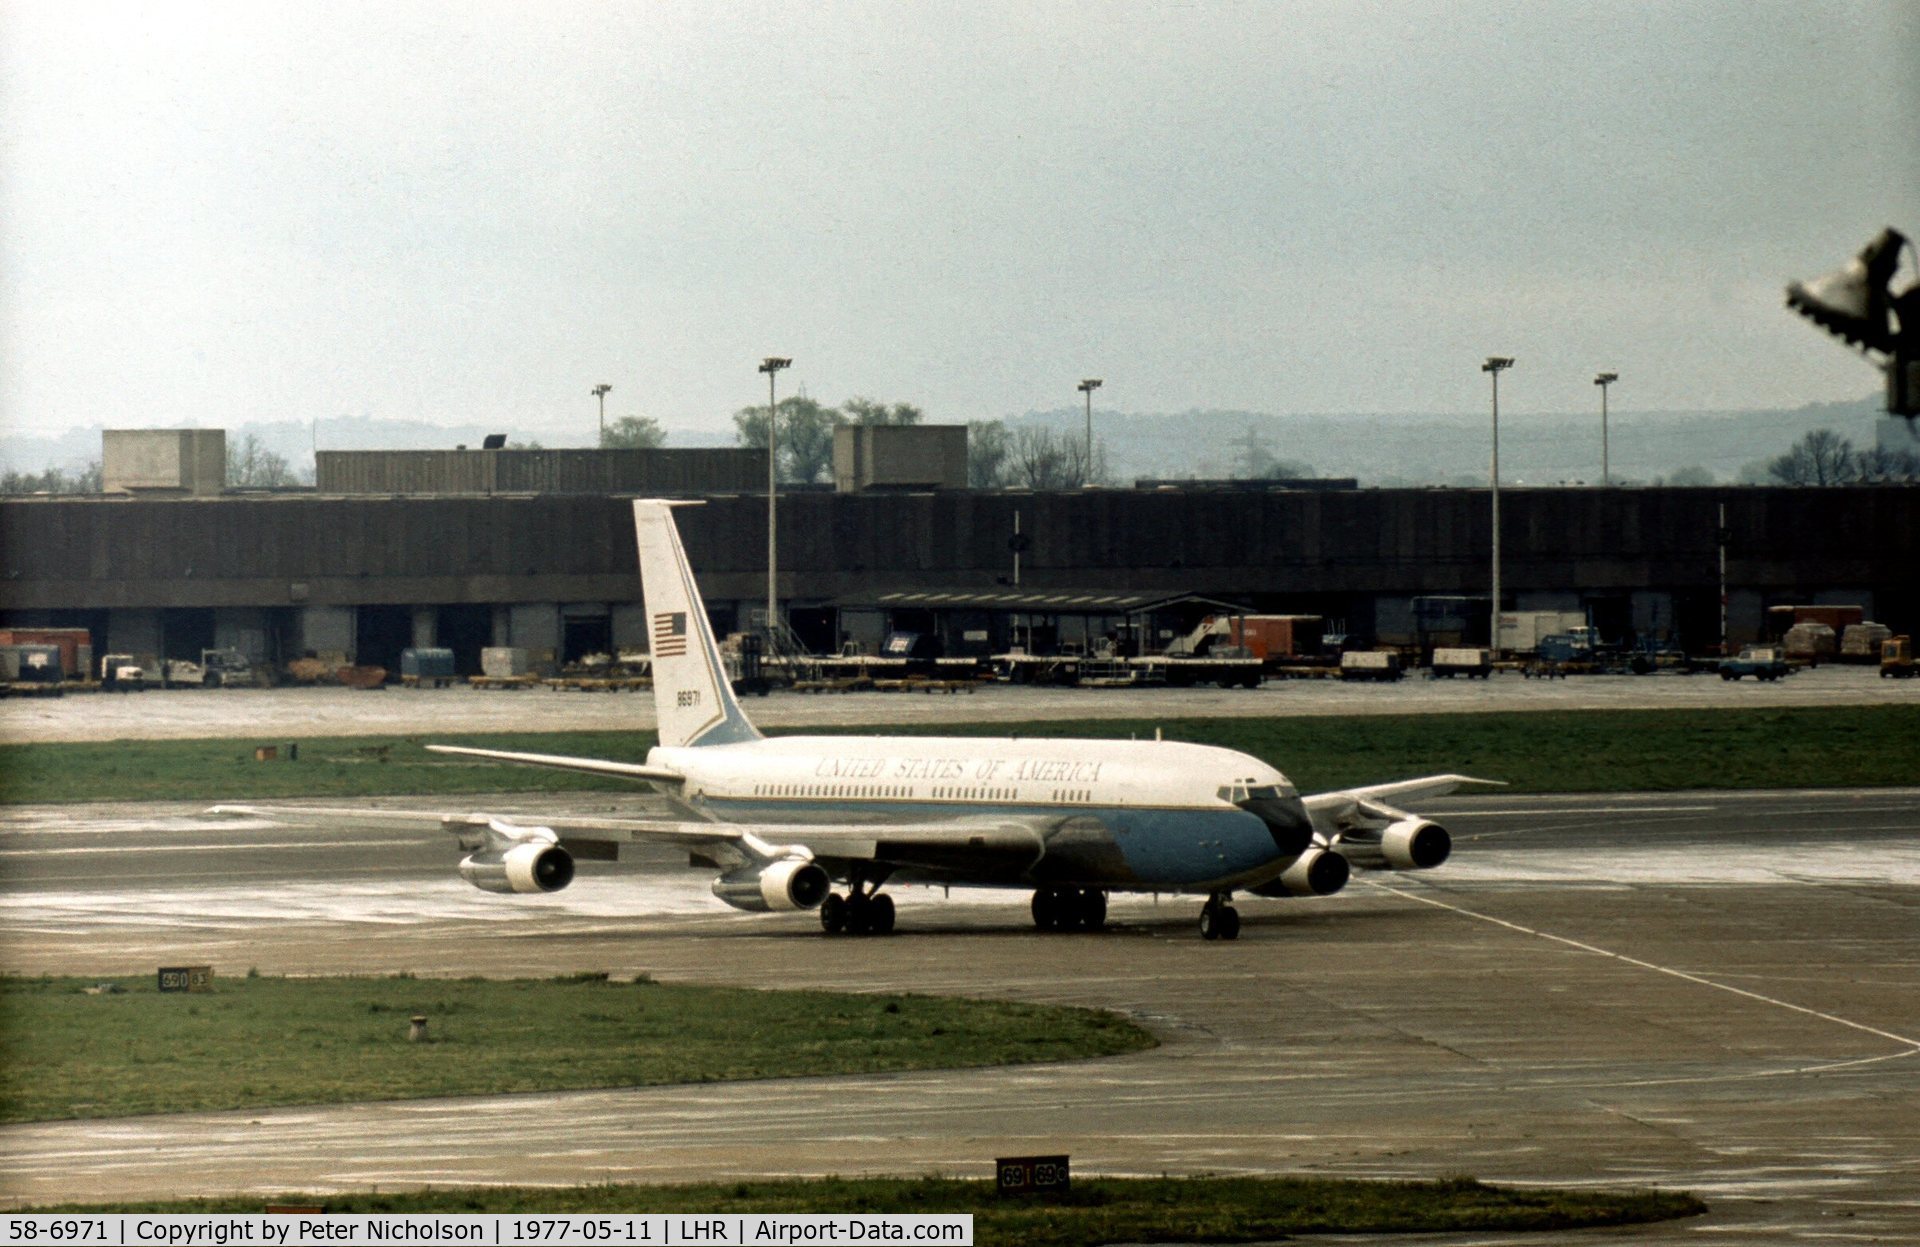 58-6971, 1959 Boeing VC-137B C/N 17926/40, 86th Military Airlift Wing VC-137B taxying to the VIP terminal at Heathrow in May 1977.